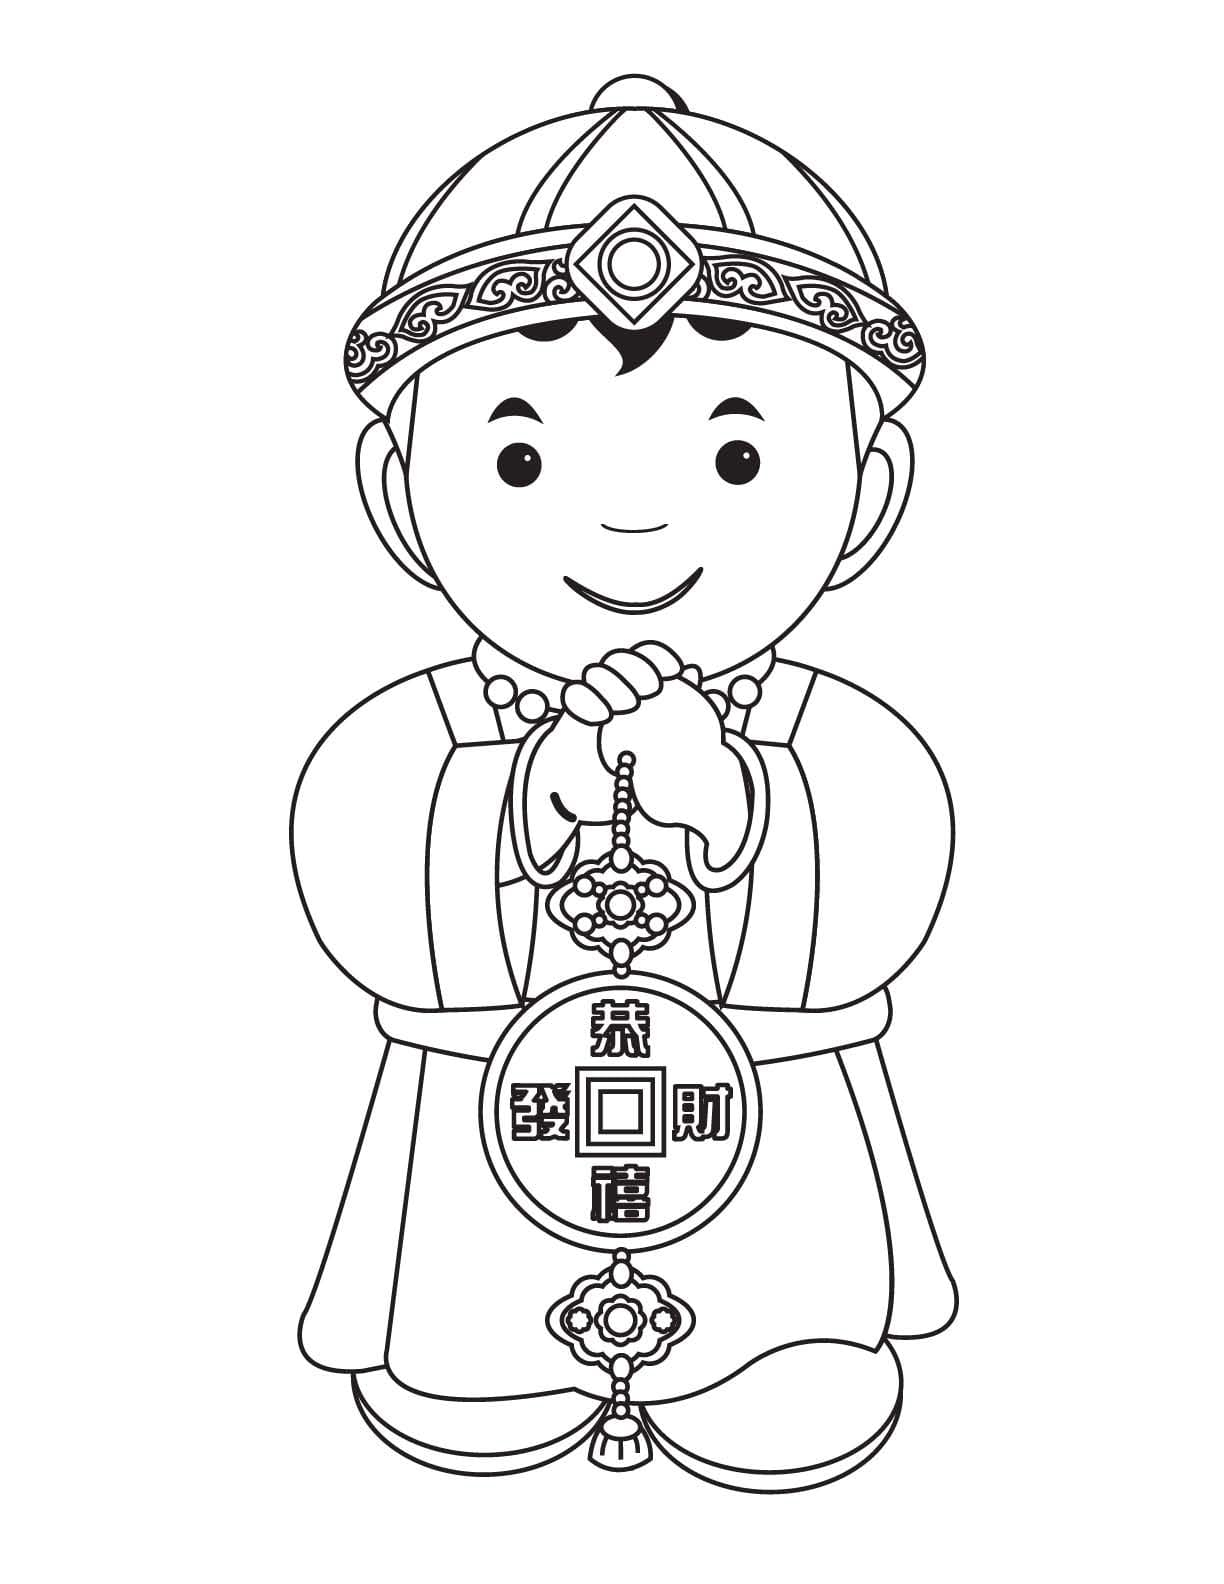 Humorous Chinese coloring book